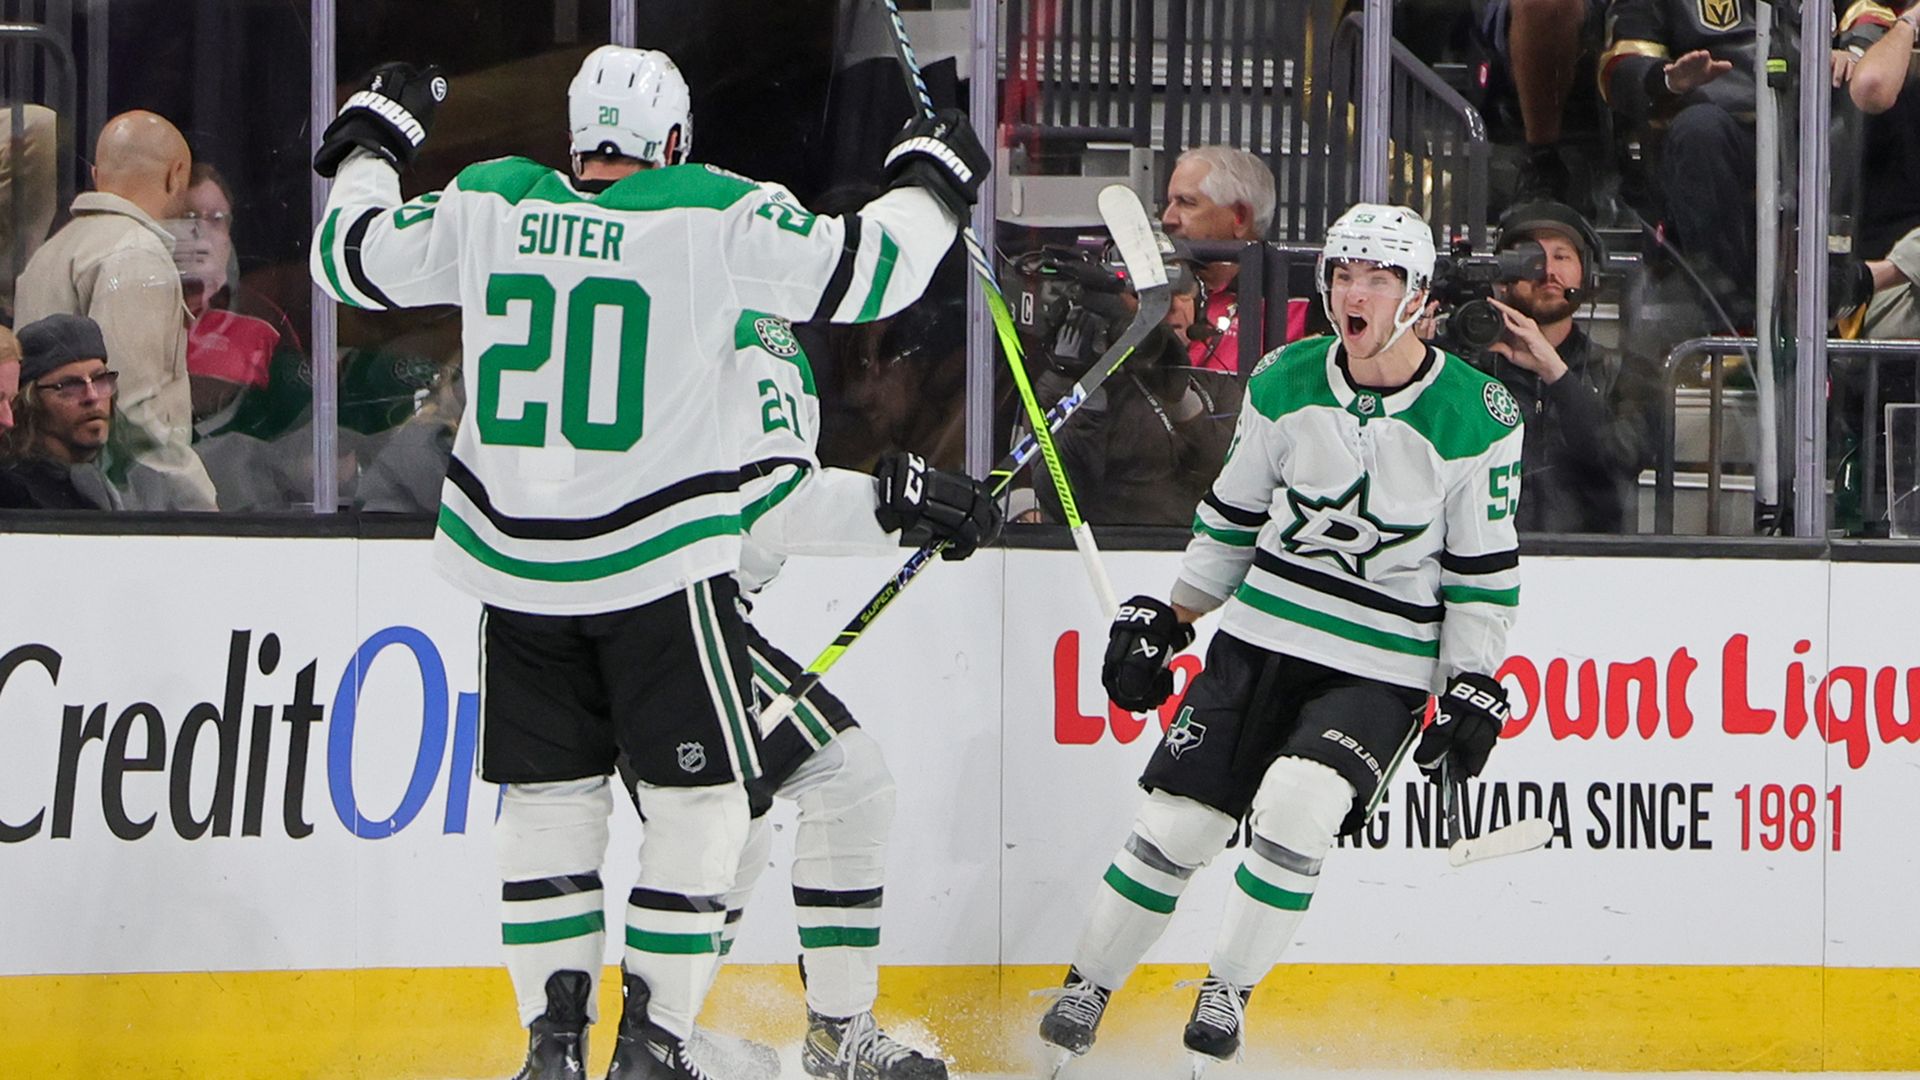 The Dallas Stars celebrate on the ice after an overtime win over the Vegas Golden Knights